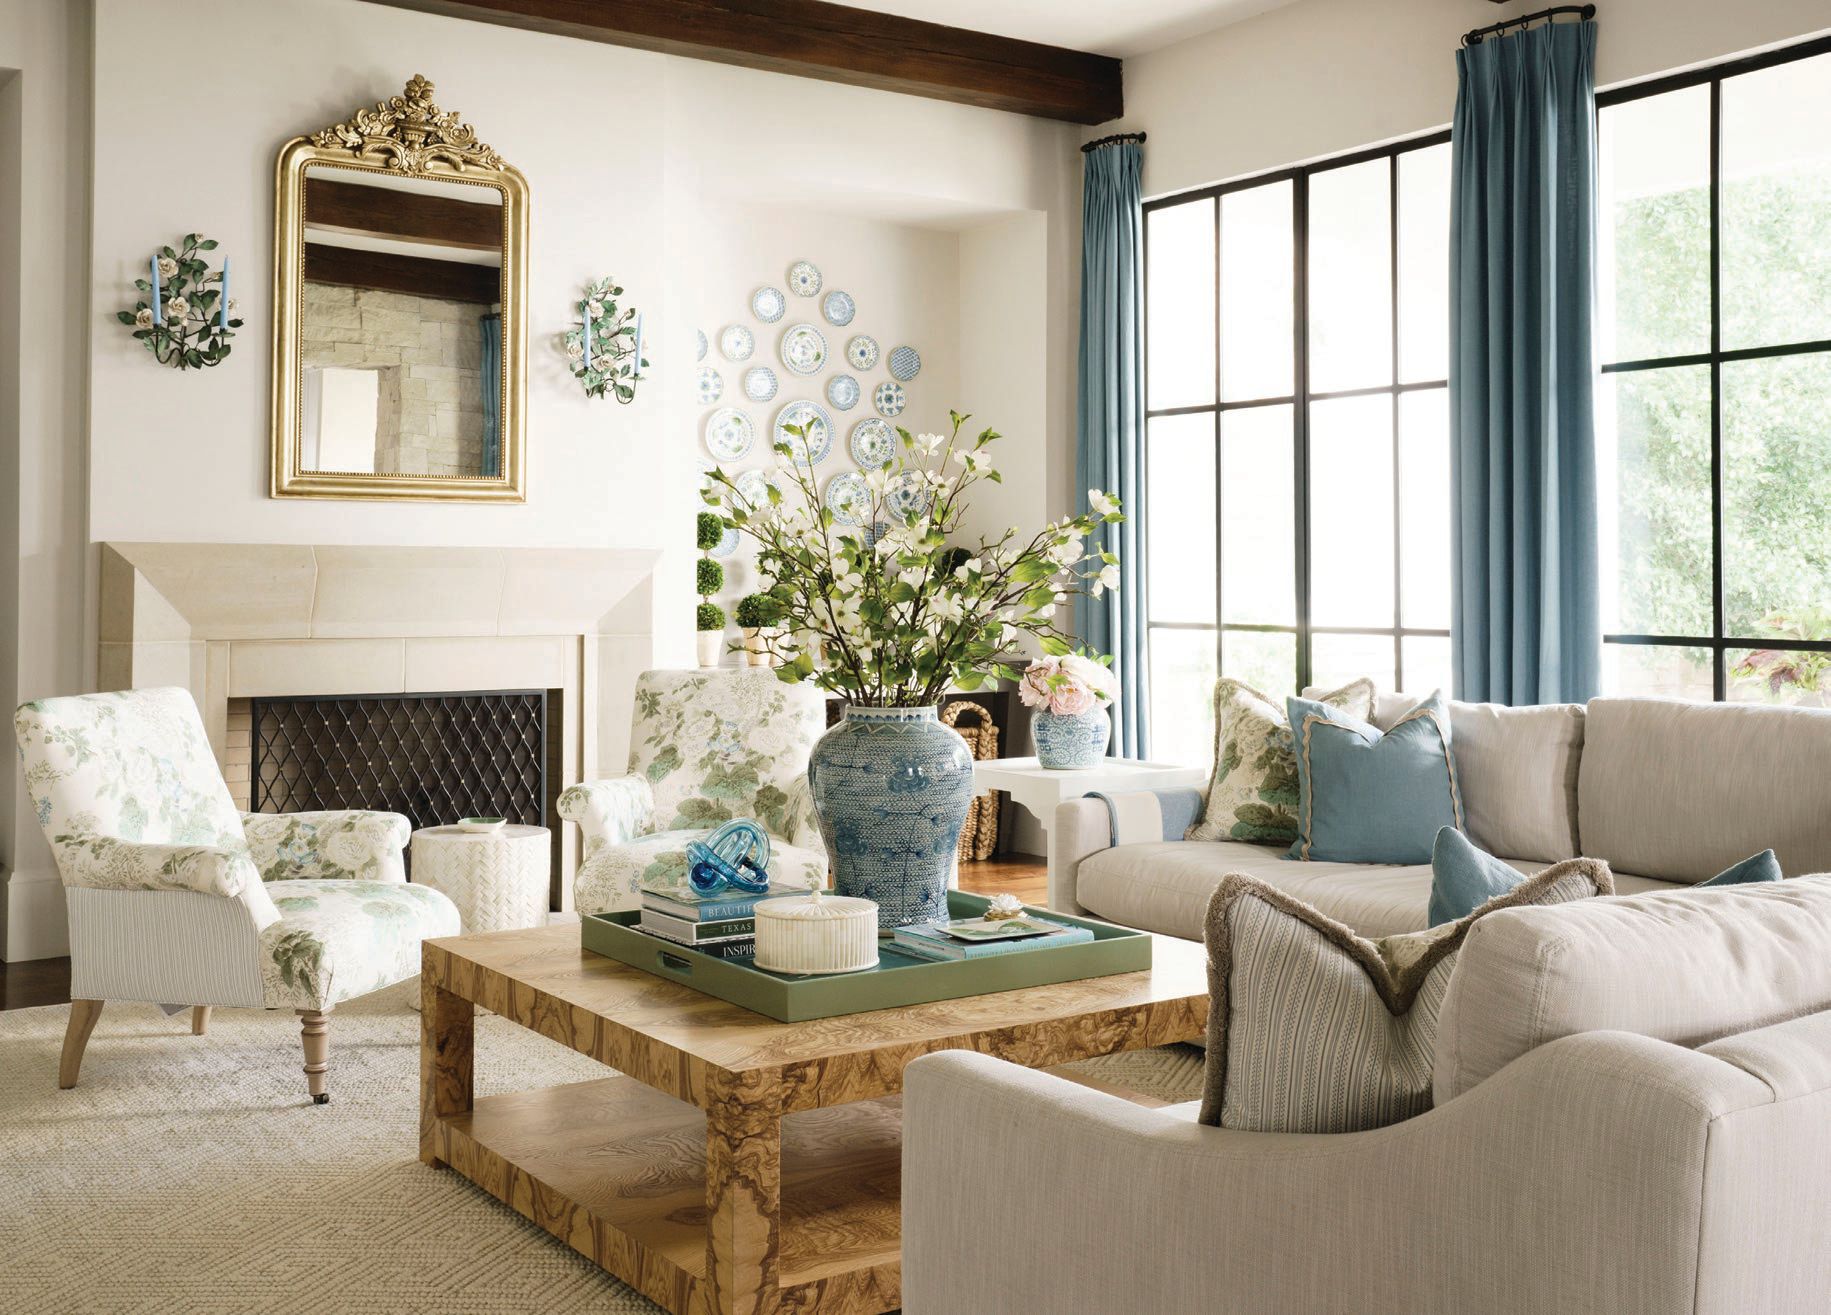 The living room provides the perfect spot for a chic respite. PHOTOGRAPHED BY JACK THOMPSON